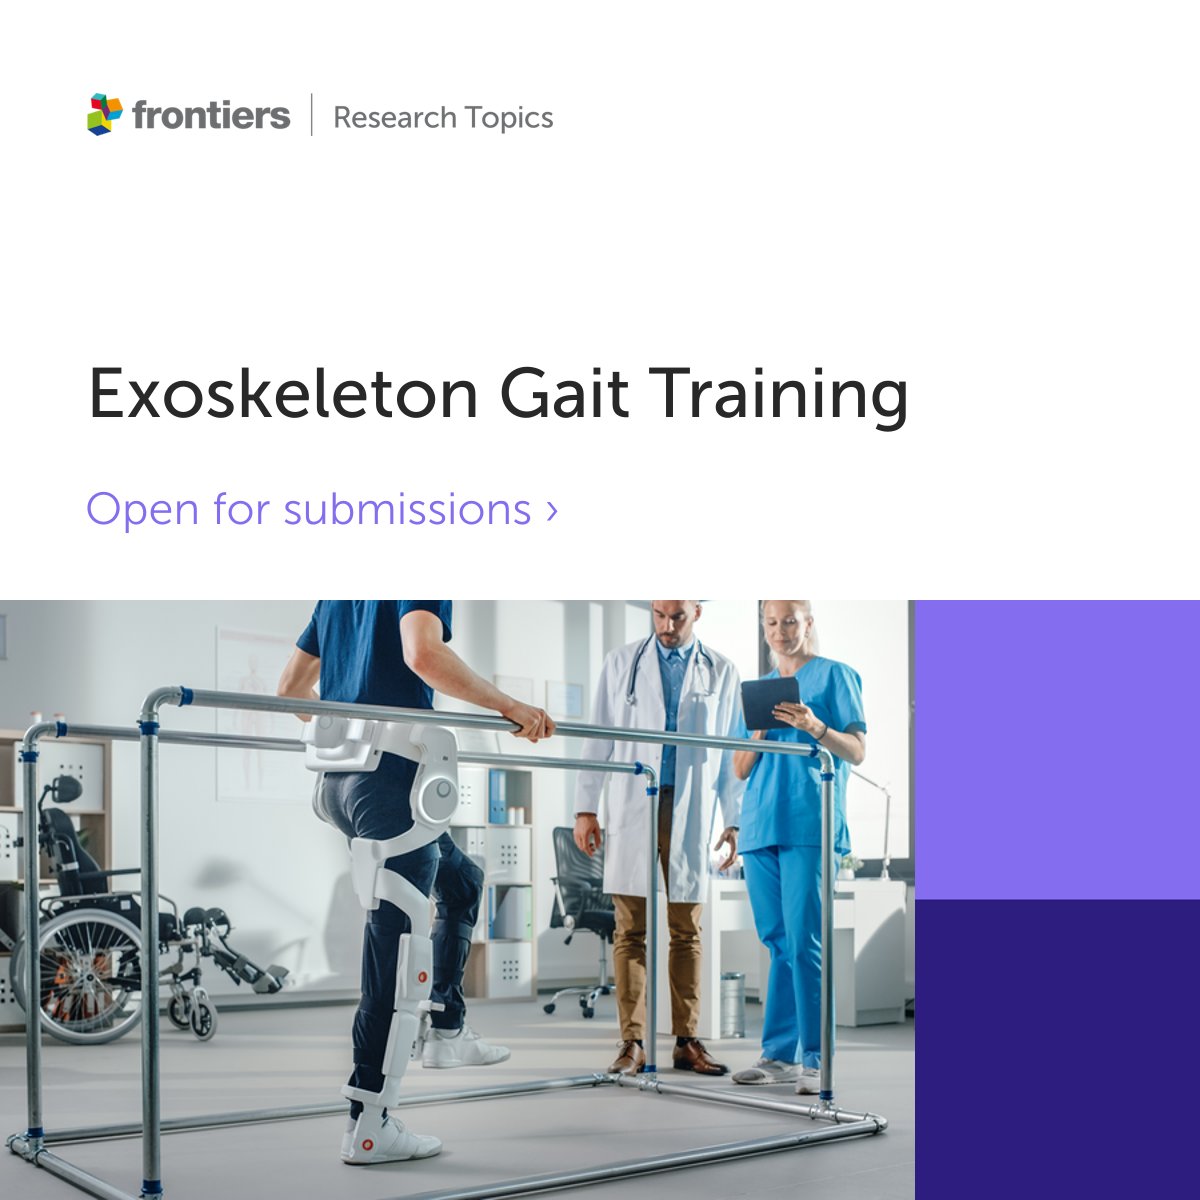 📣Submissions open till Sept30 Explore the intersection of biomechanics, neuroprosthetics, and sensorimotor adaptations in exoskeleton research ➡️help shape the future of neuroprosthetic developments! submit here fro.ntiers.in/EGT #ExoskeletonGaitTraining #Neuroprosthetics